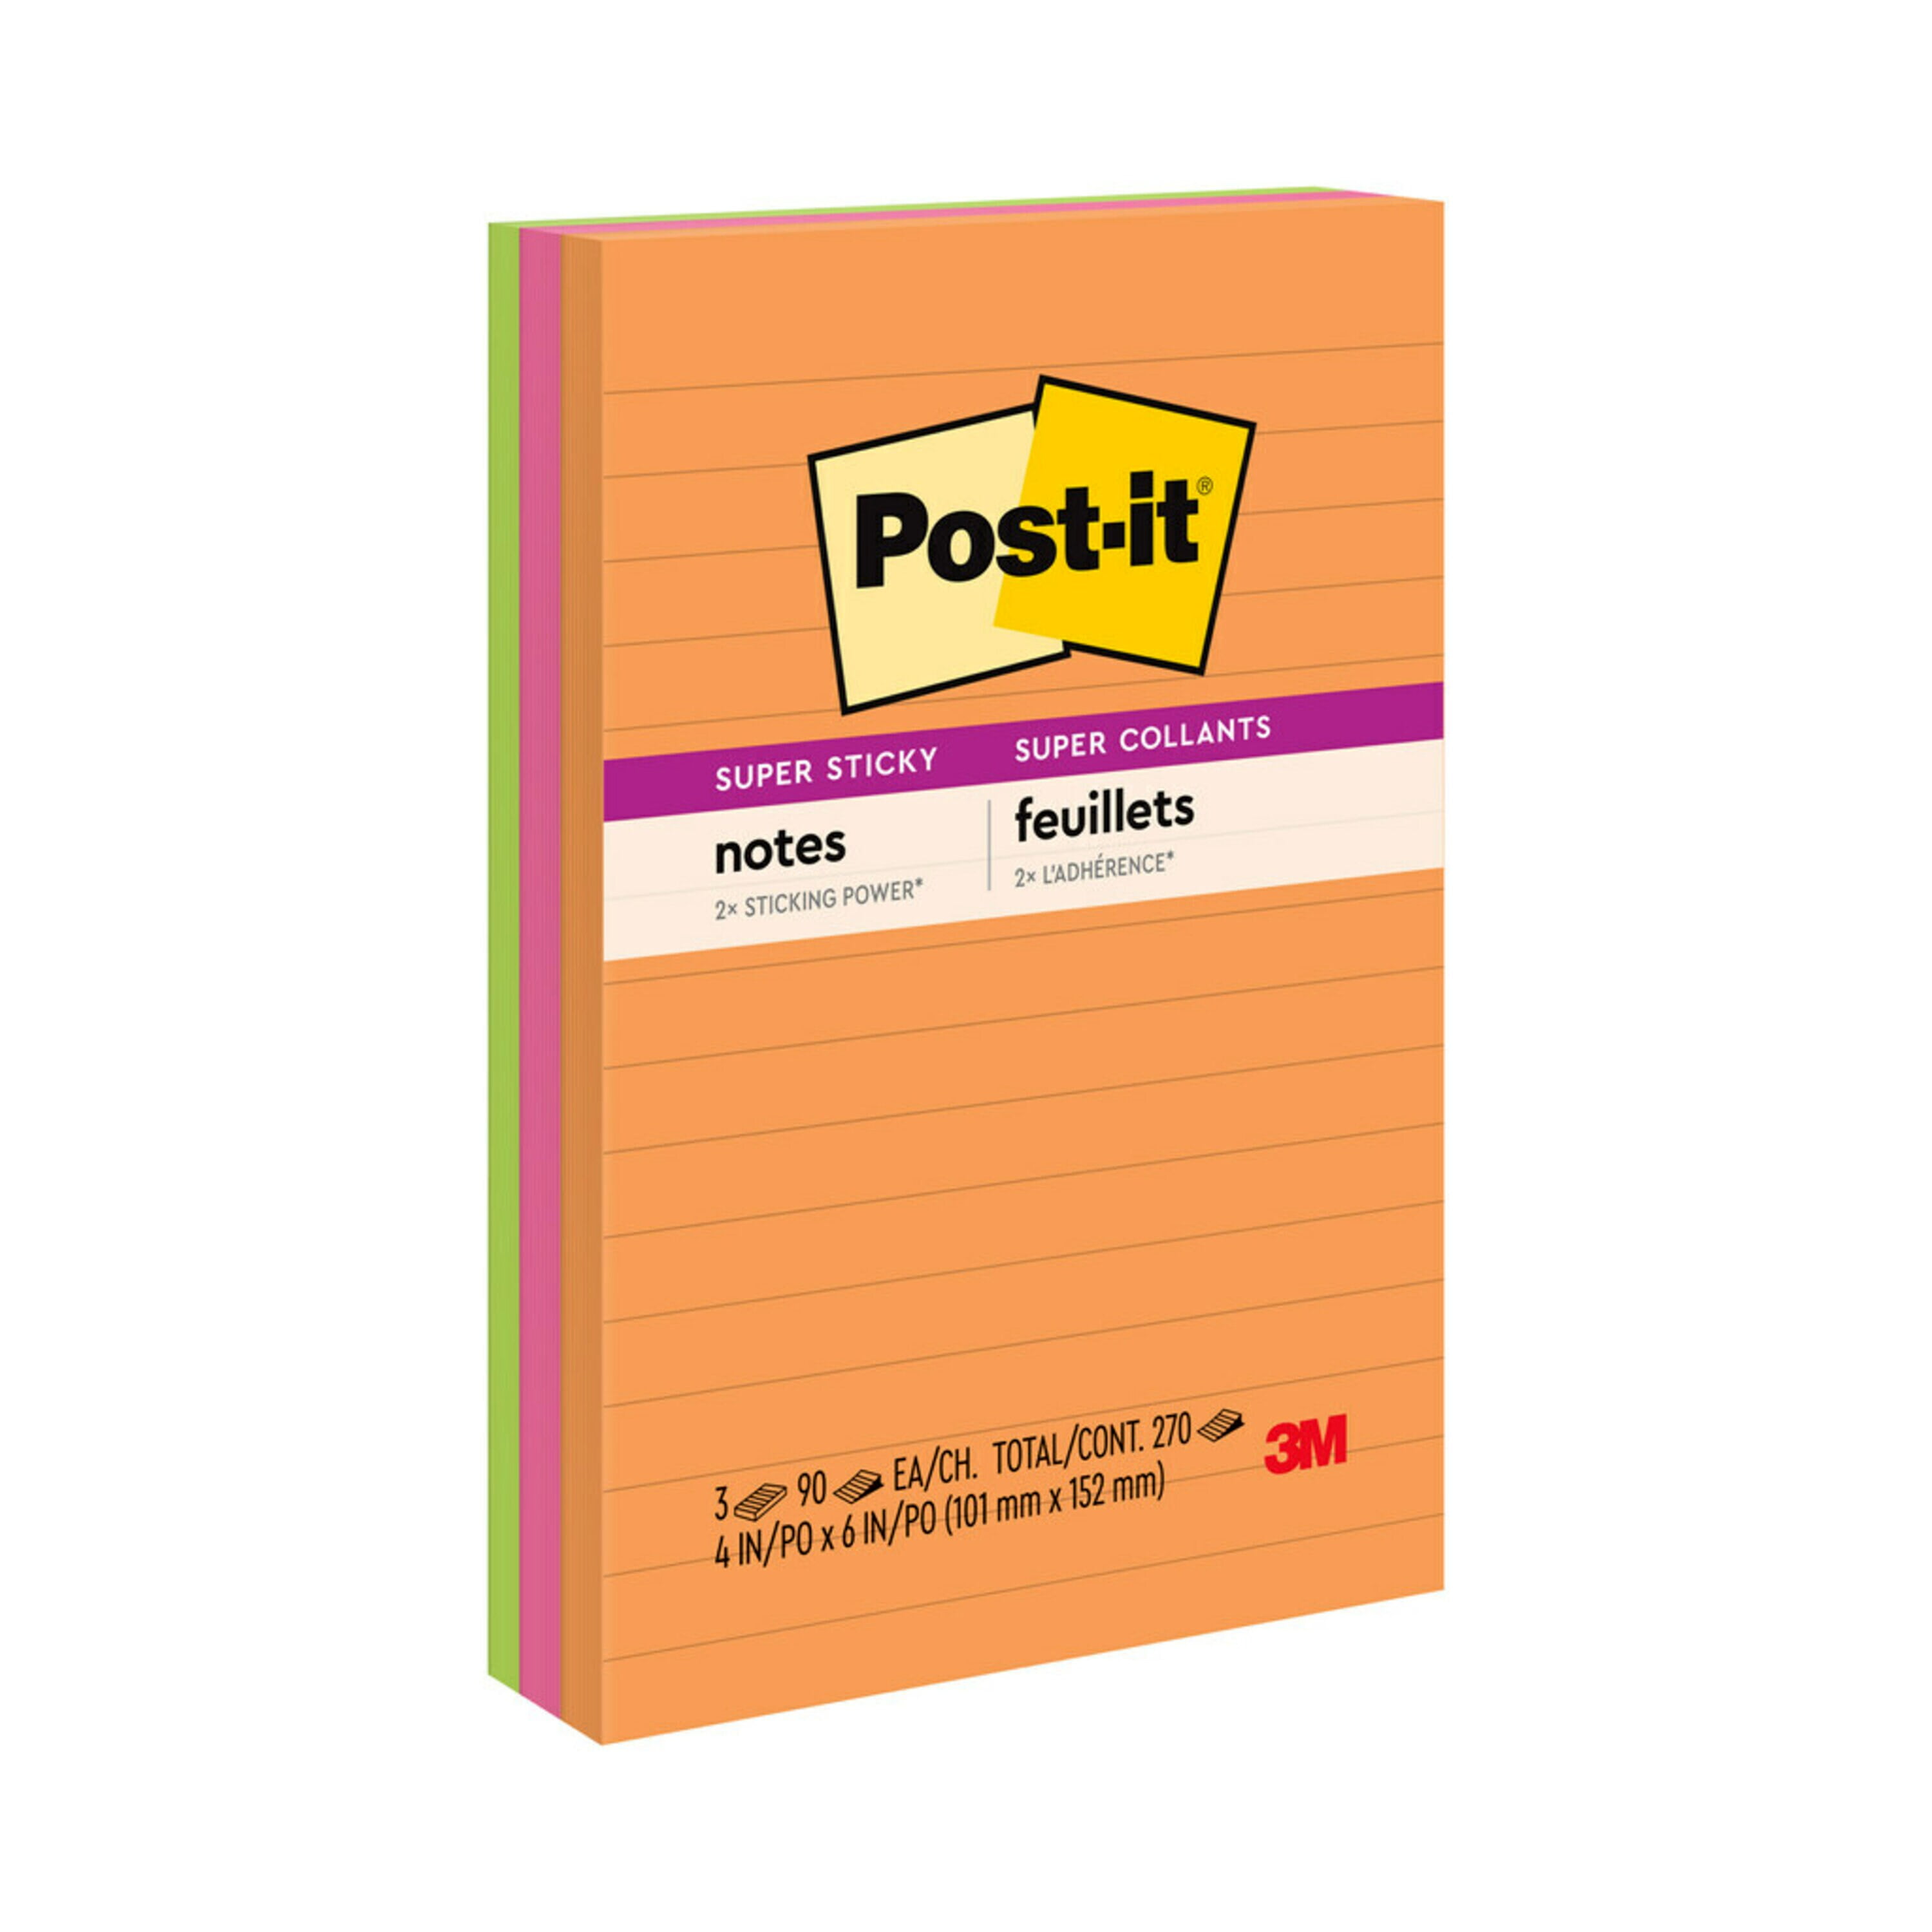 Post-it Super Sticky Lined Notes, Energy Boost Collection, 4 in. x 6 in.,  90 Sheets, 3 Pads 